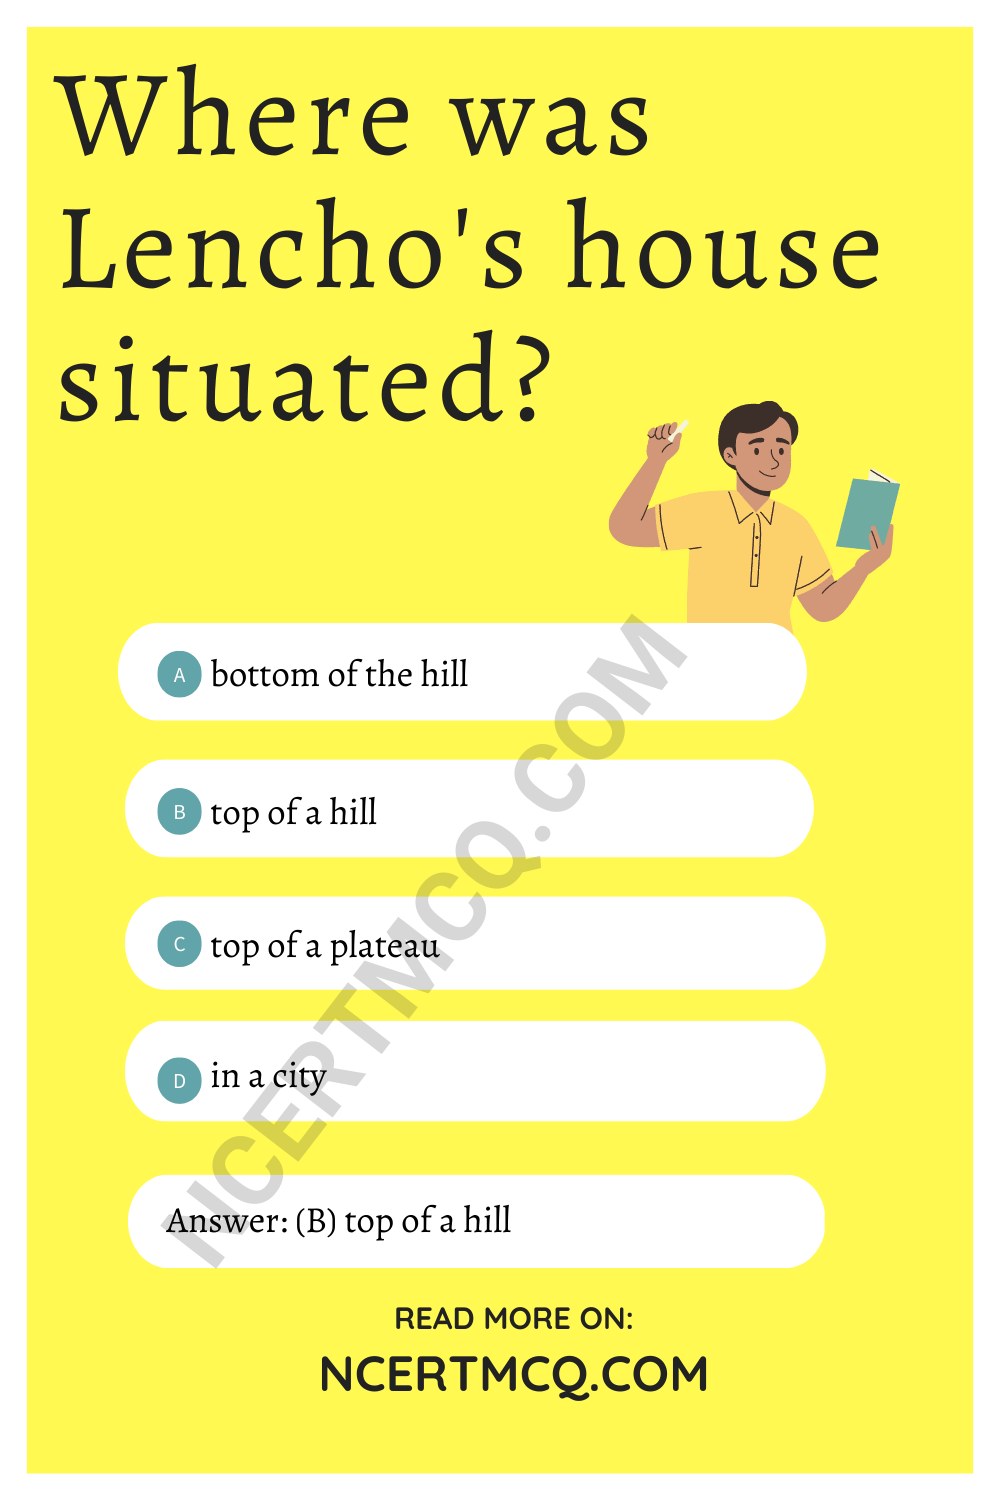 Where was Lencho's house situated?